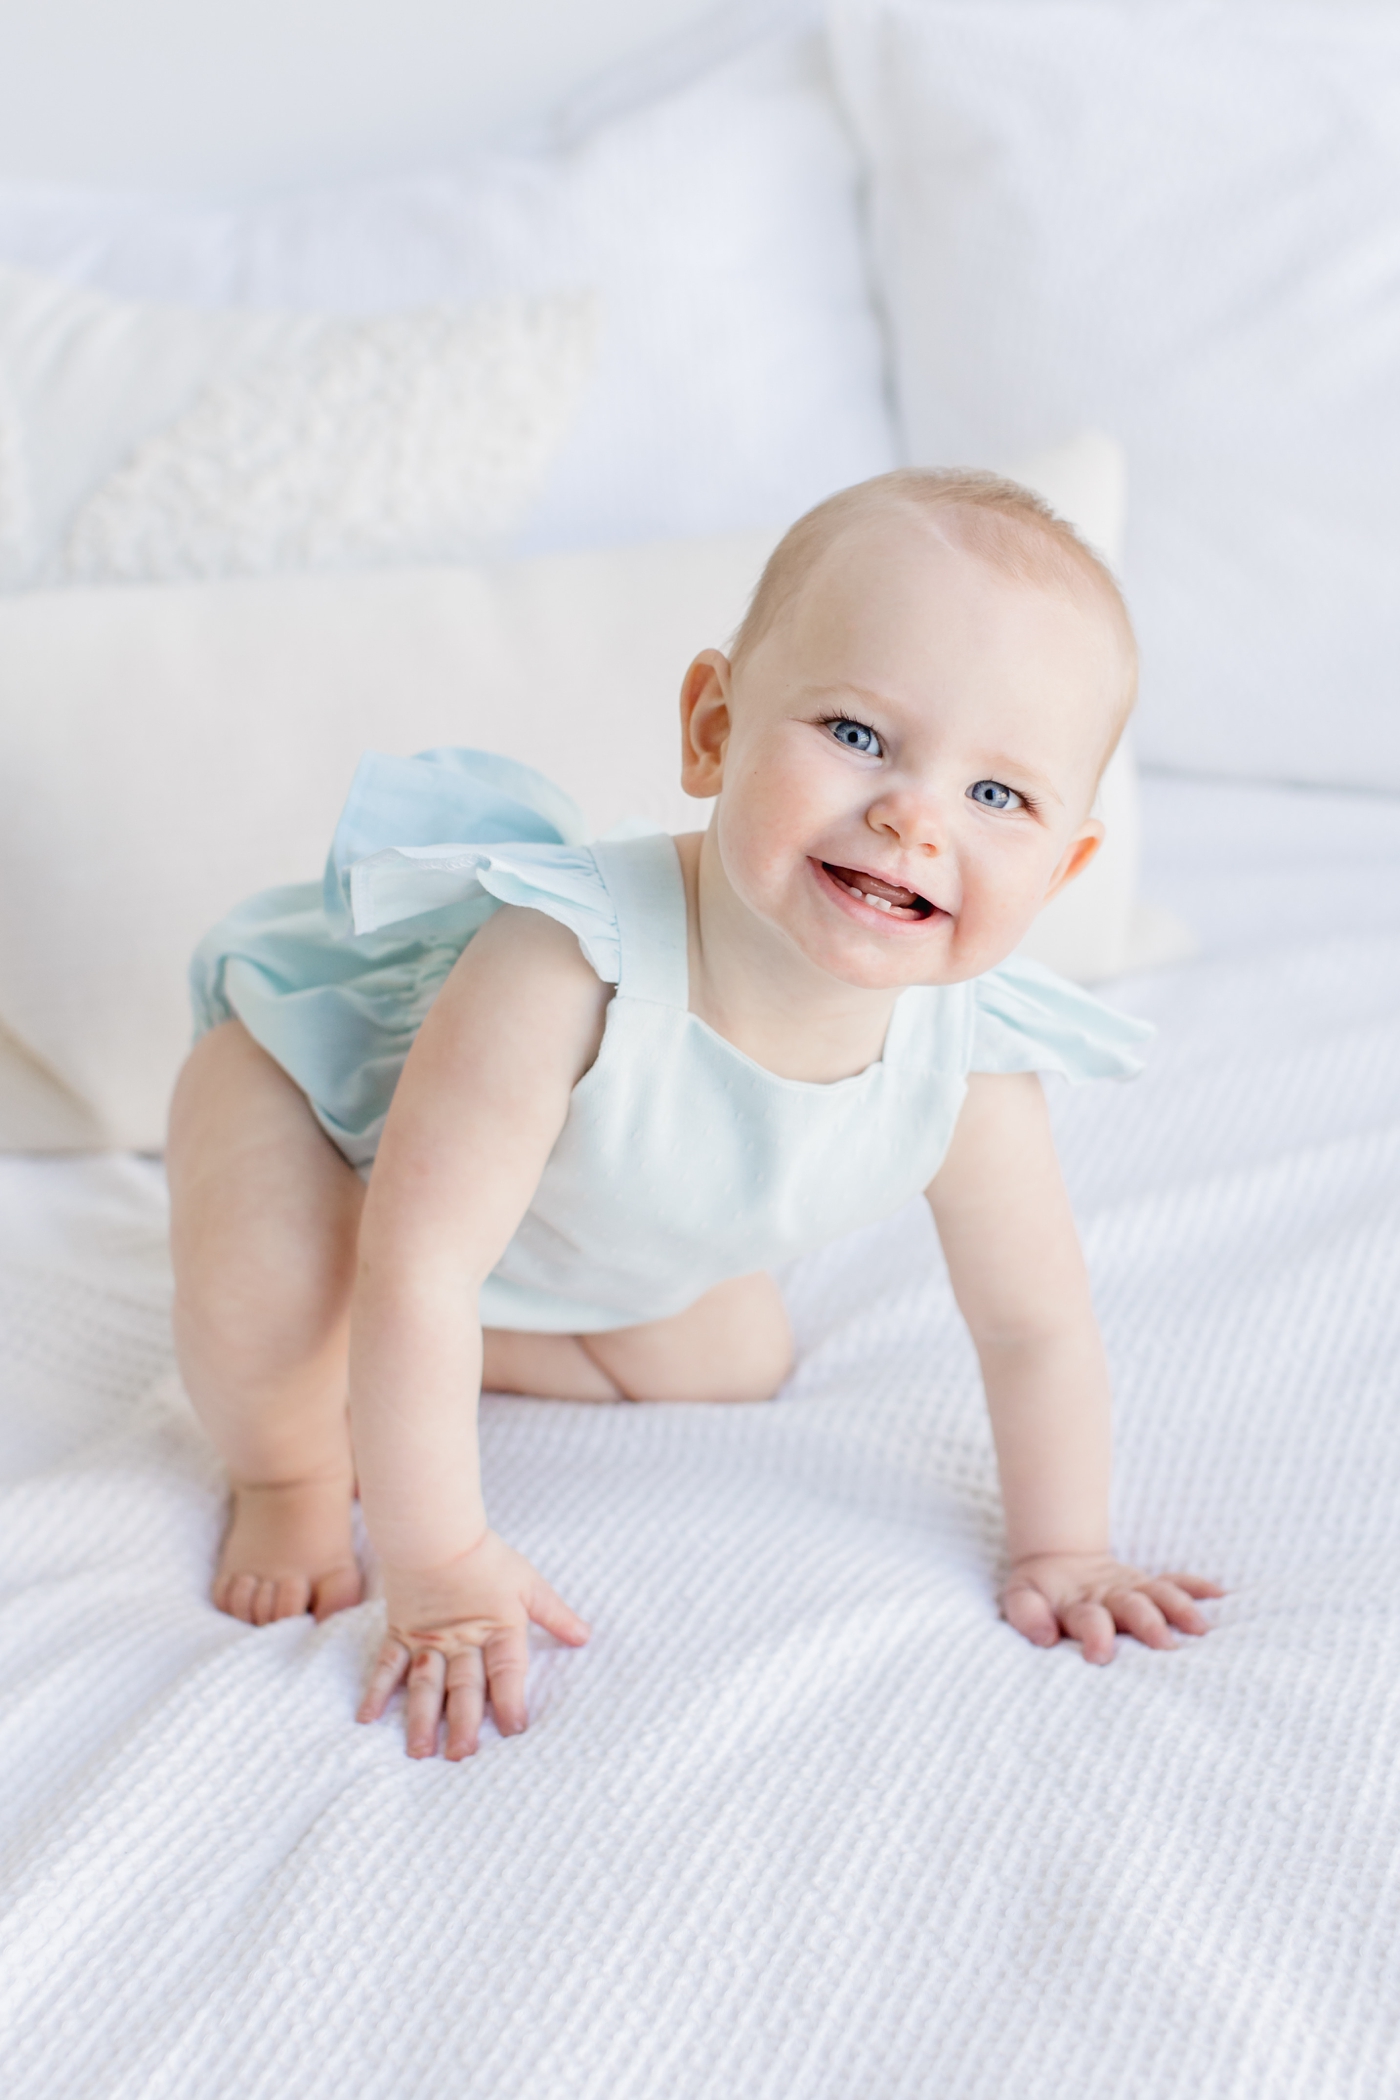 Toddler with a big smile while crawling on the bed in studio session. Photo by Austin family photographer, Sana Ahmed Photography.